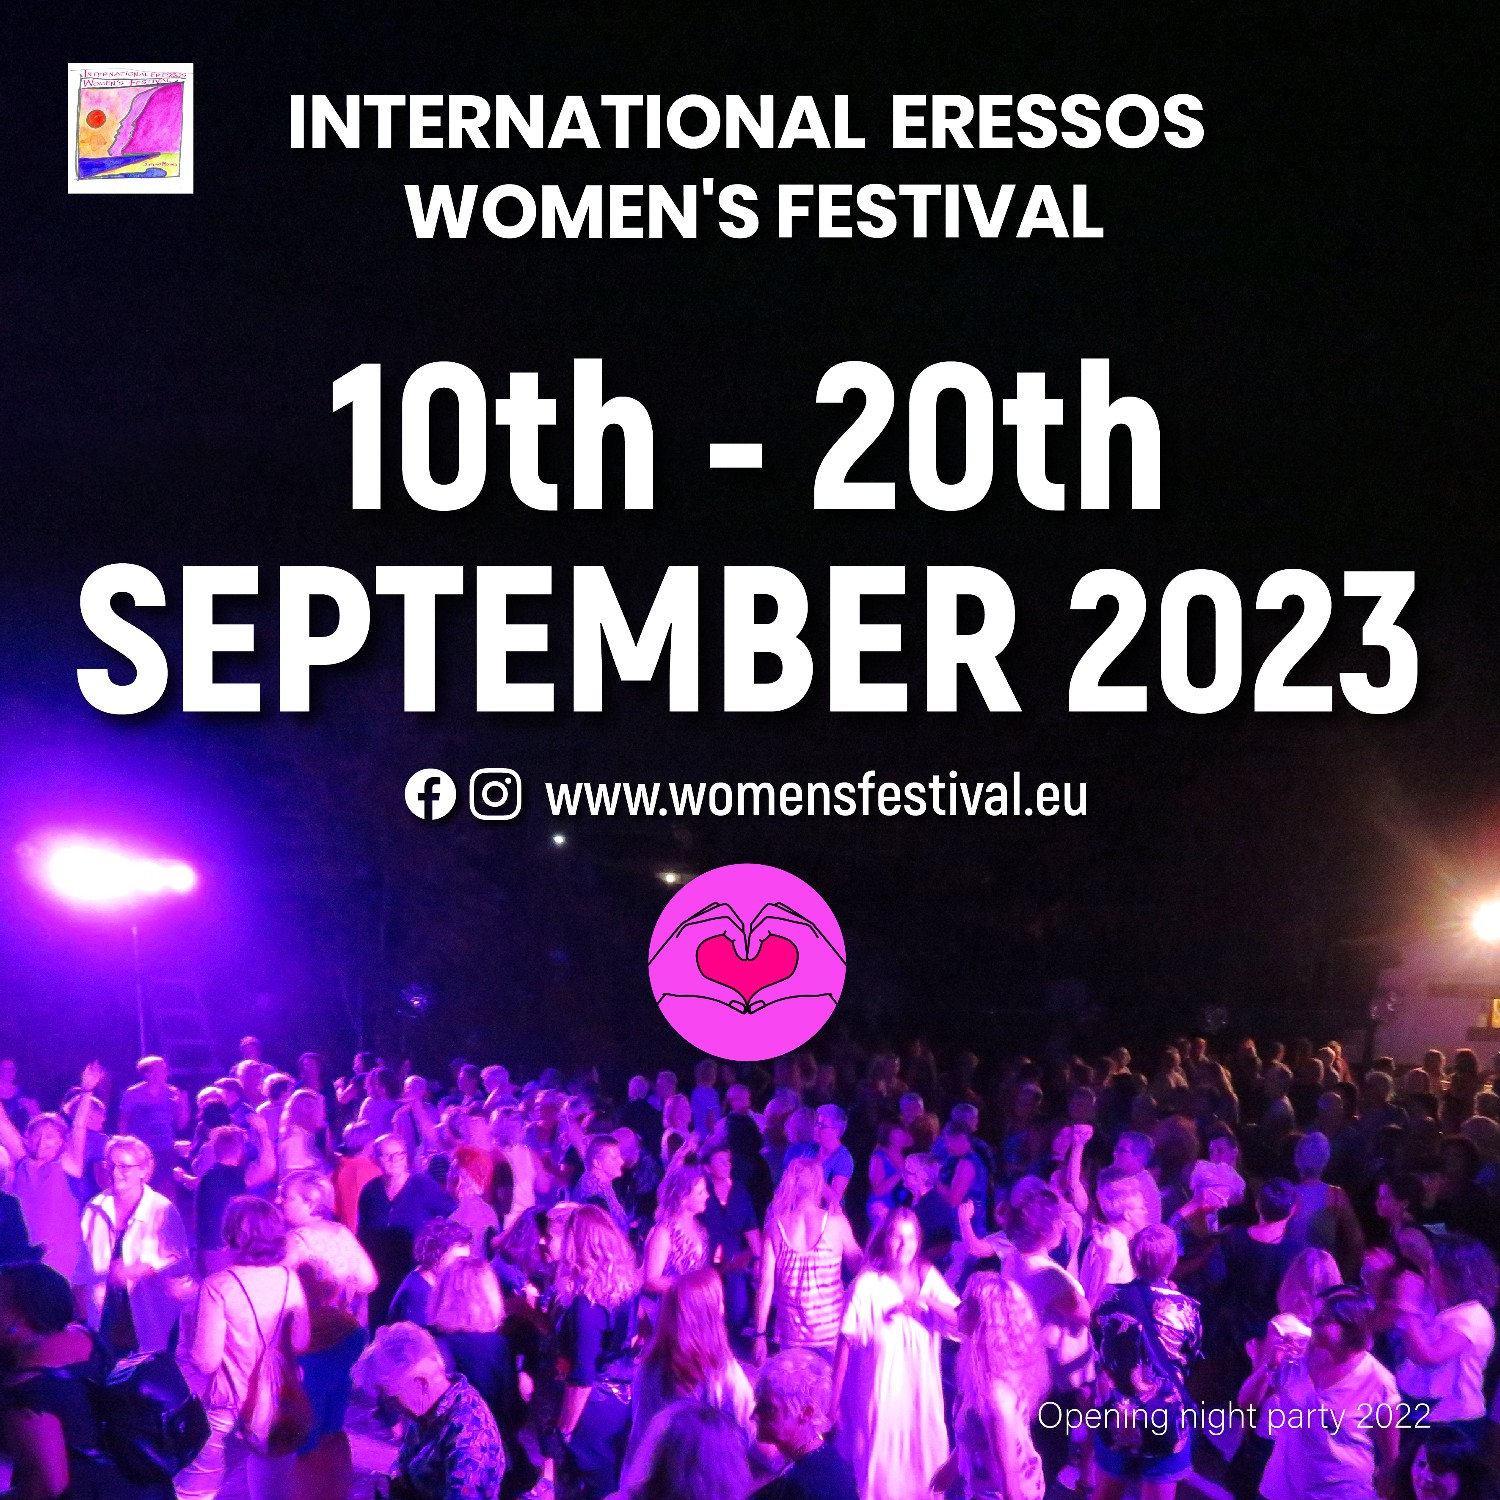 Festival dates 2023: 10th to 20th September 2023